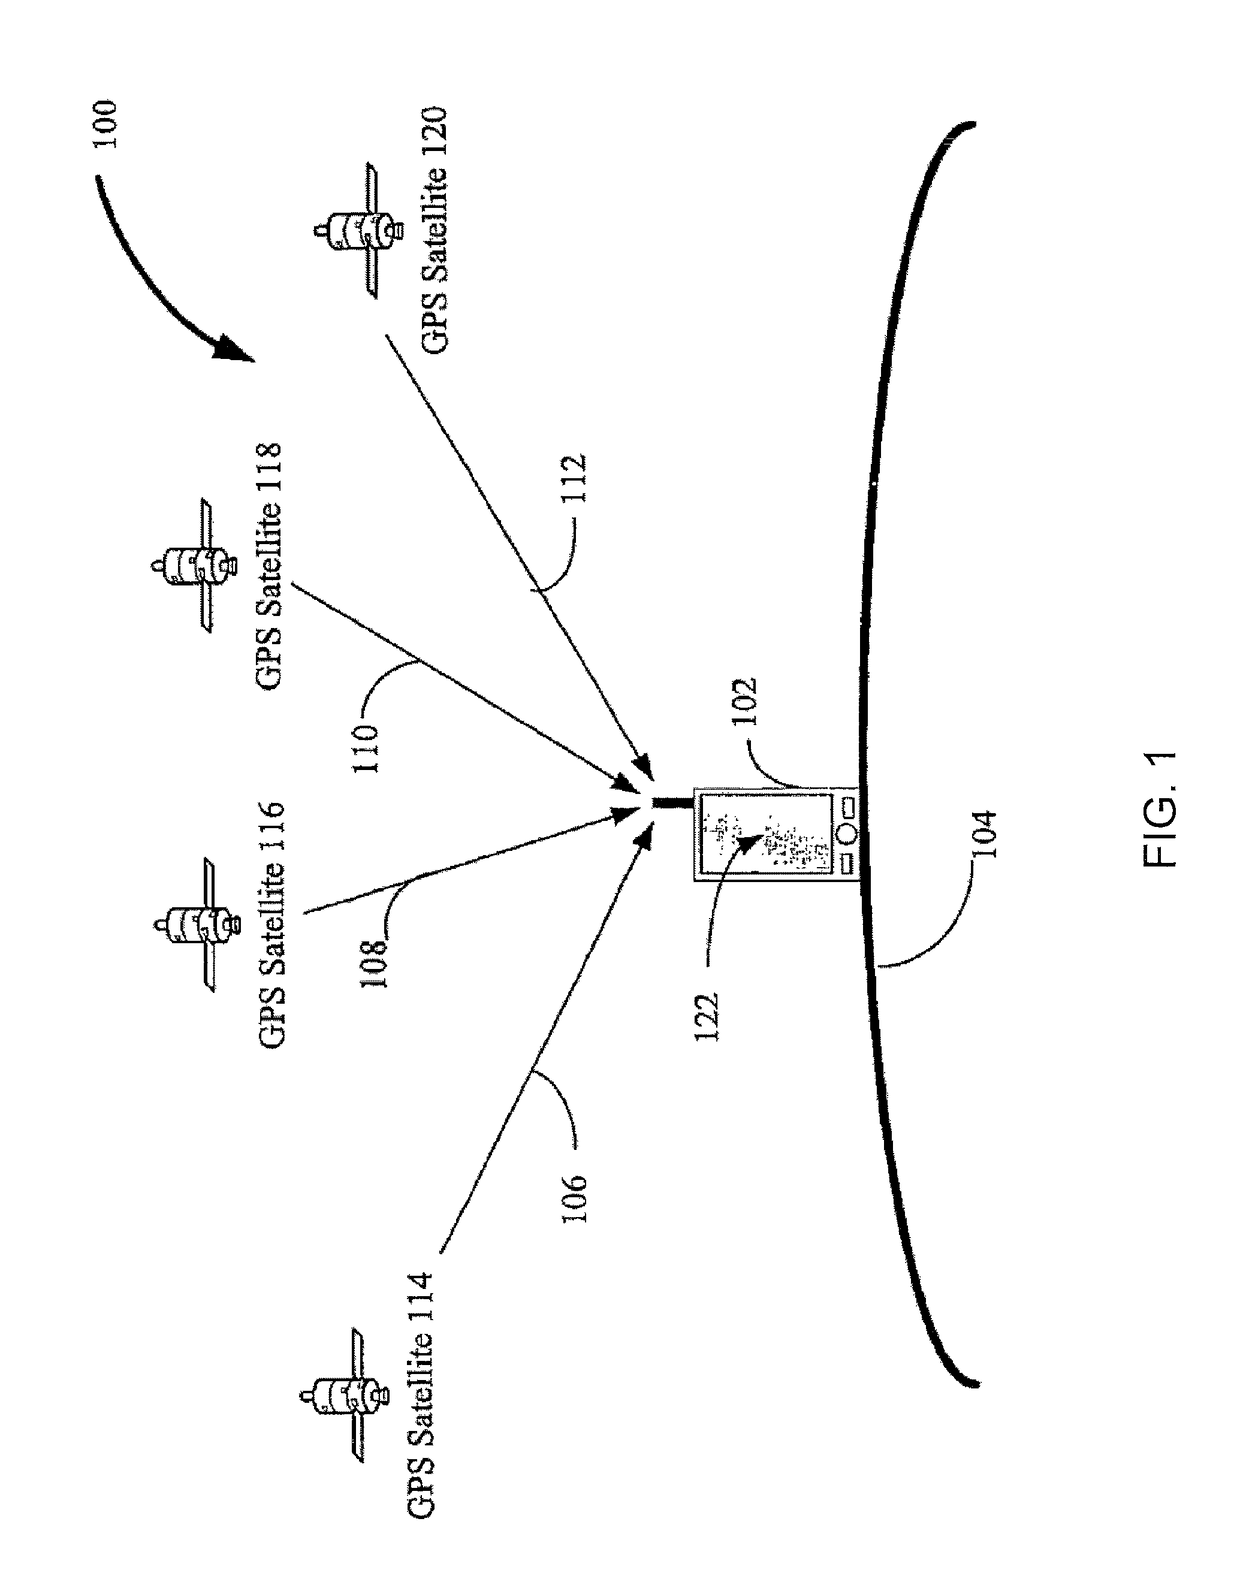 Hierarchical context detection method to determine location of a mobile device on a person's body